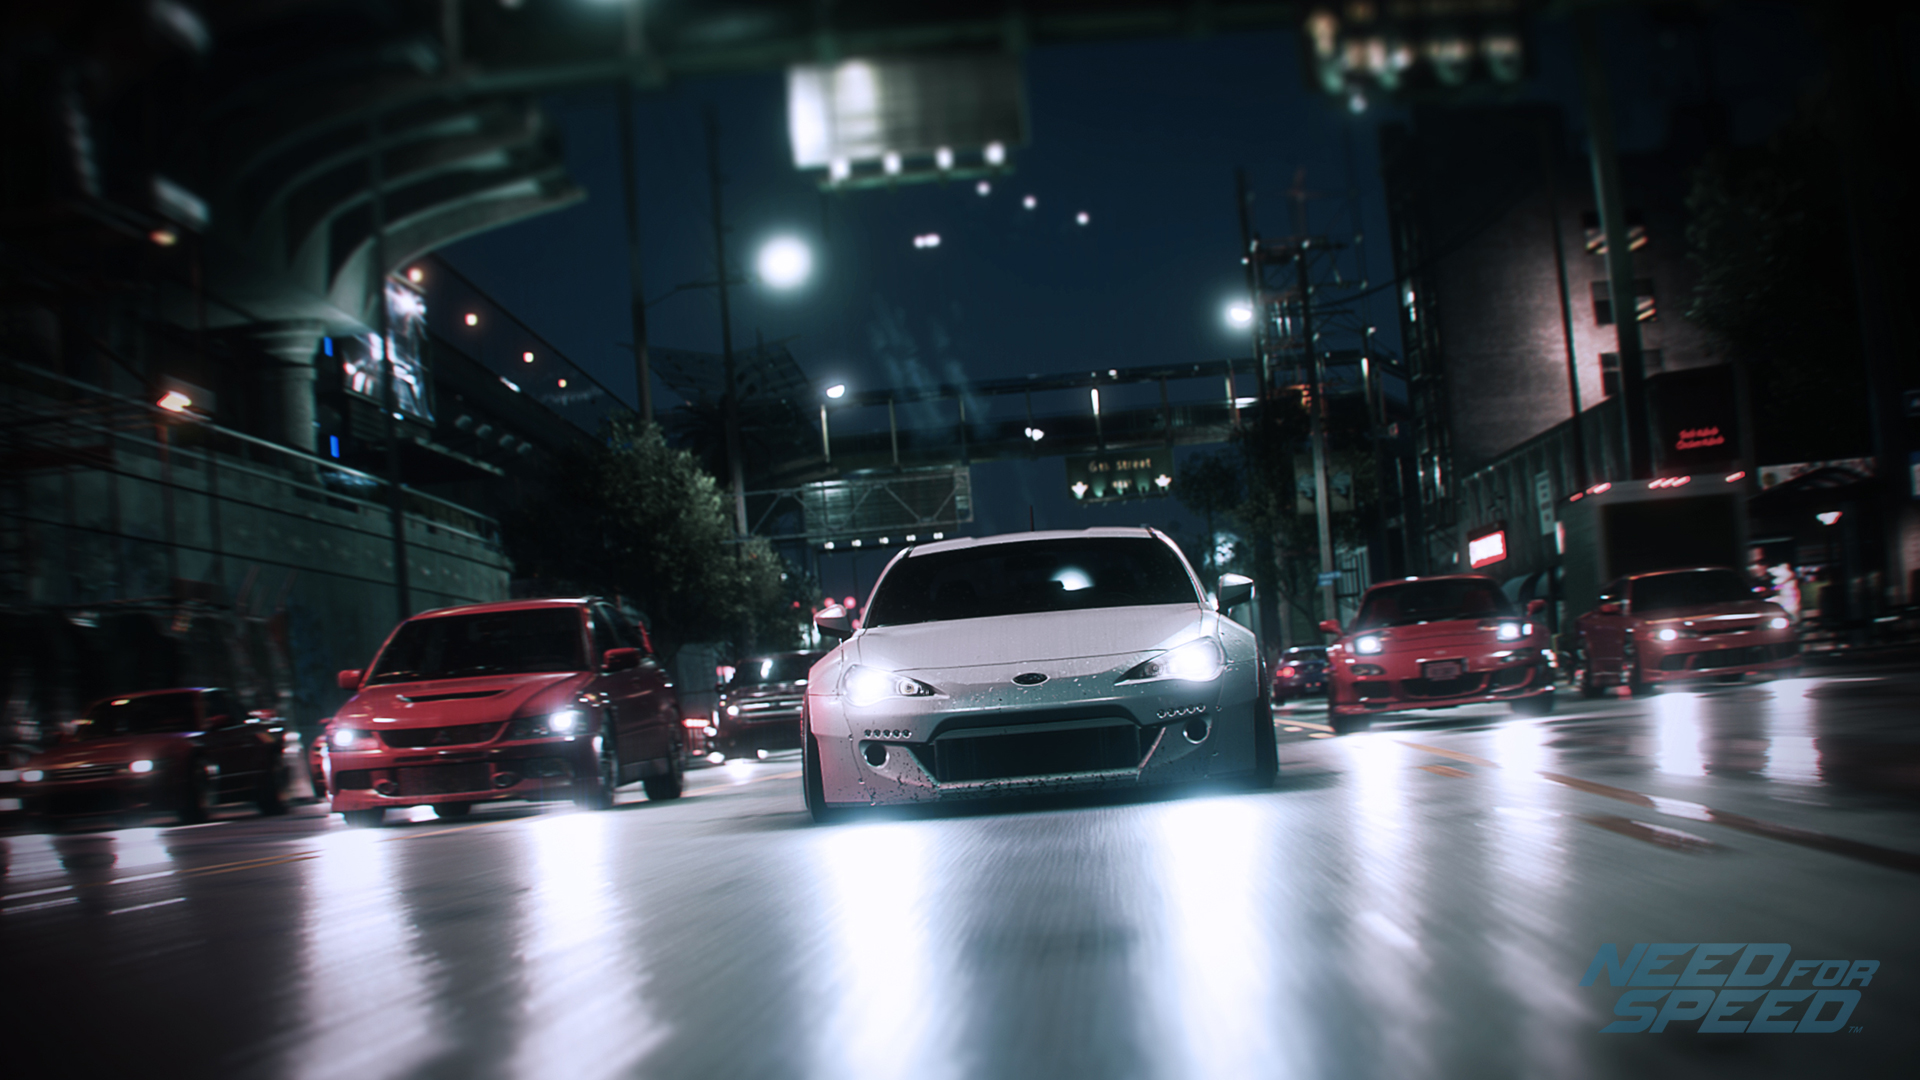 Need For Speed (2015) Backgrounds, Compatible - PC, Mobile, Gadgets| 1920x1080 px